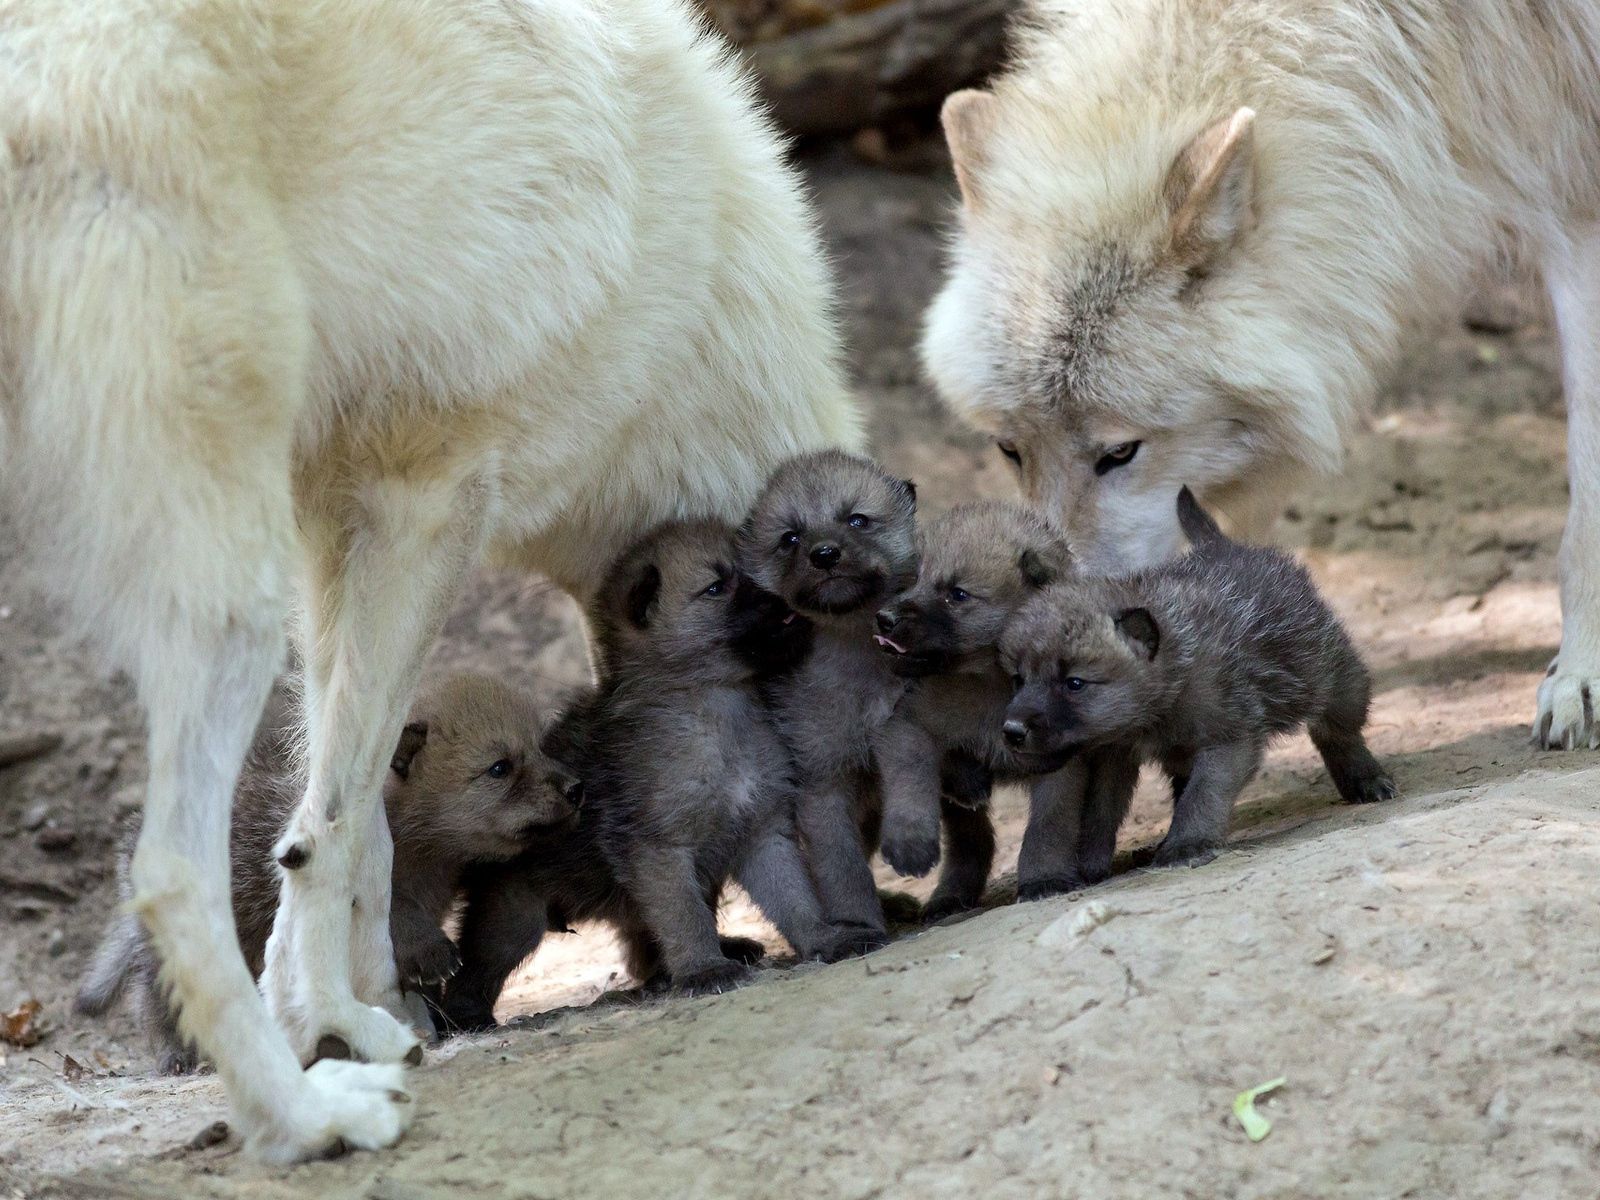 Download wallpaper 1600x1200 wolves, puppies, cubs, care standard